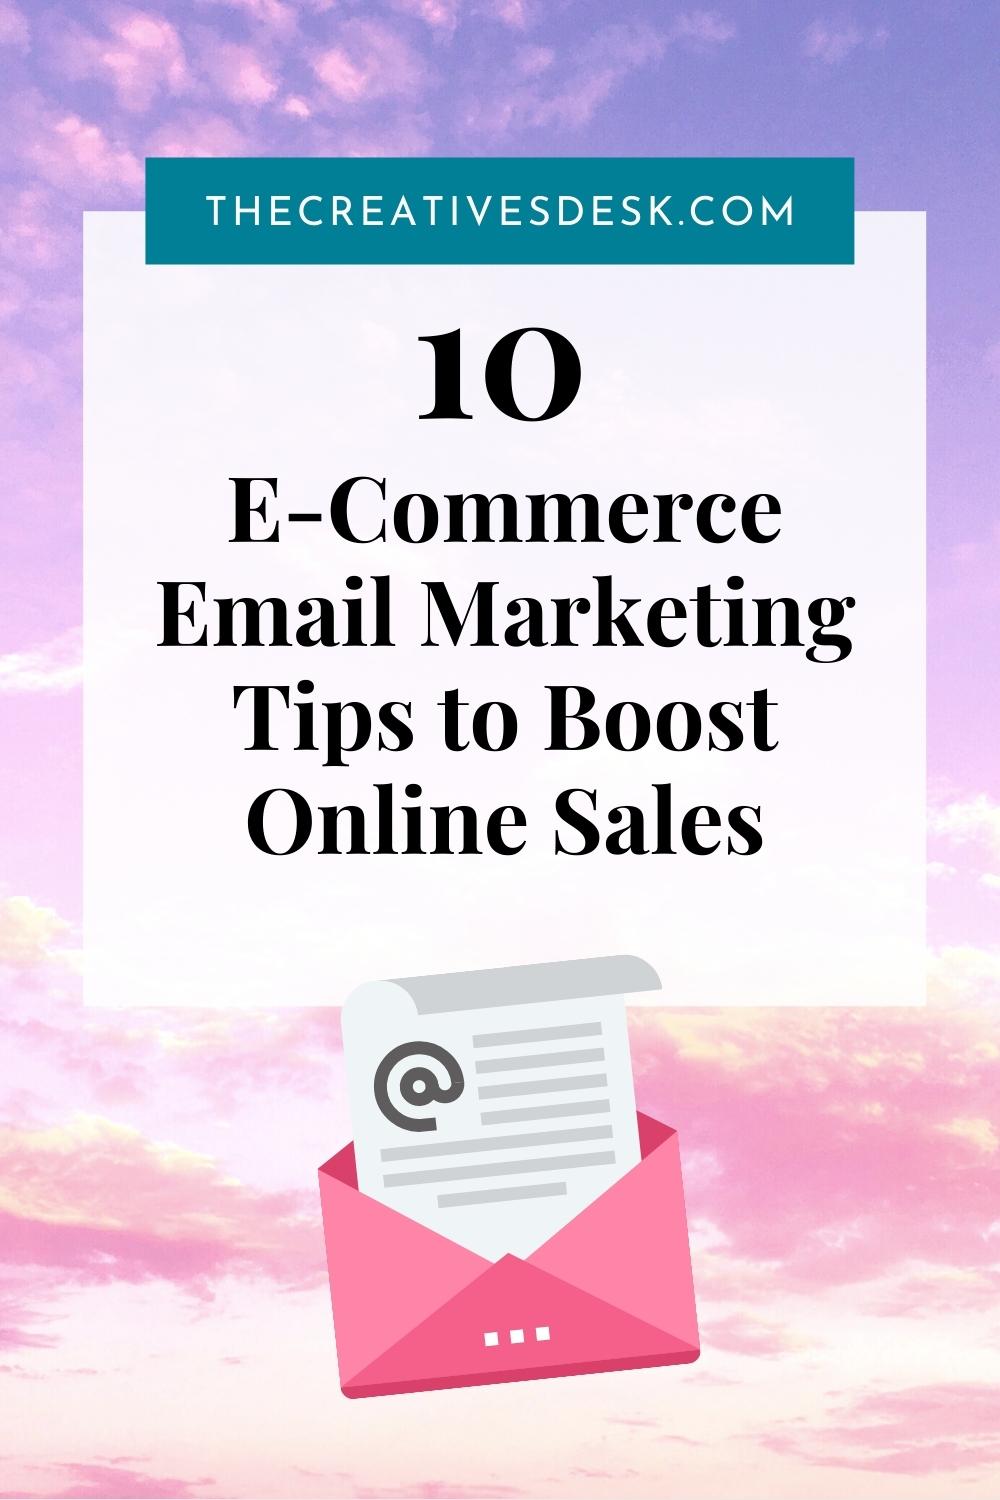 10 E-Commerce Email Marketing Tips to Boost Your Online Sales